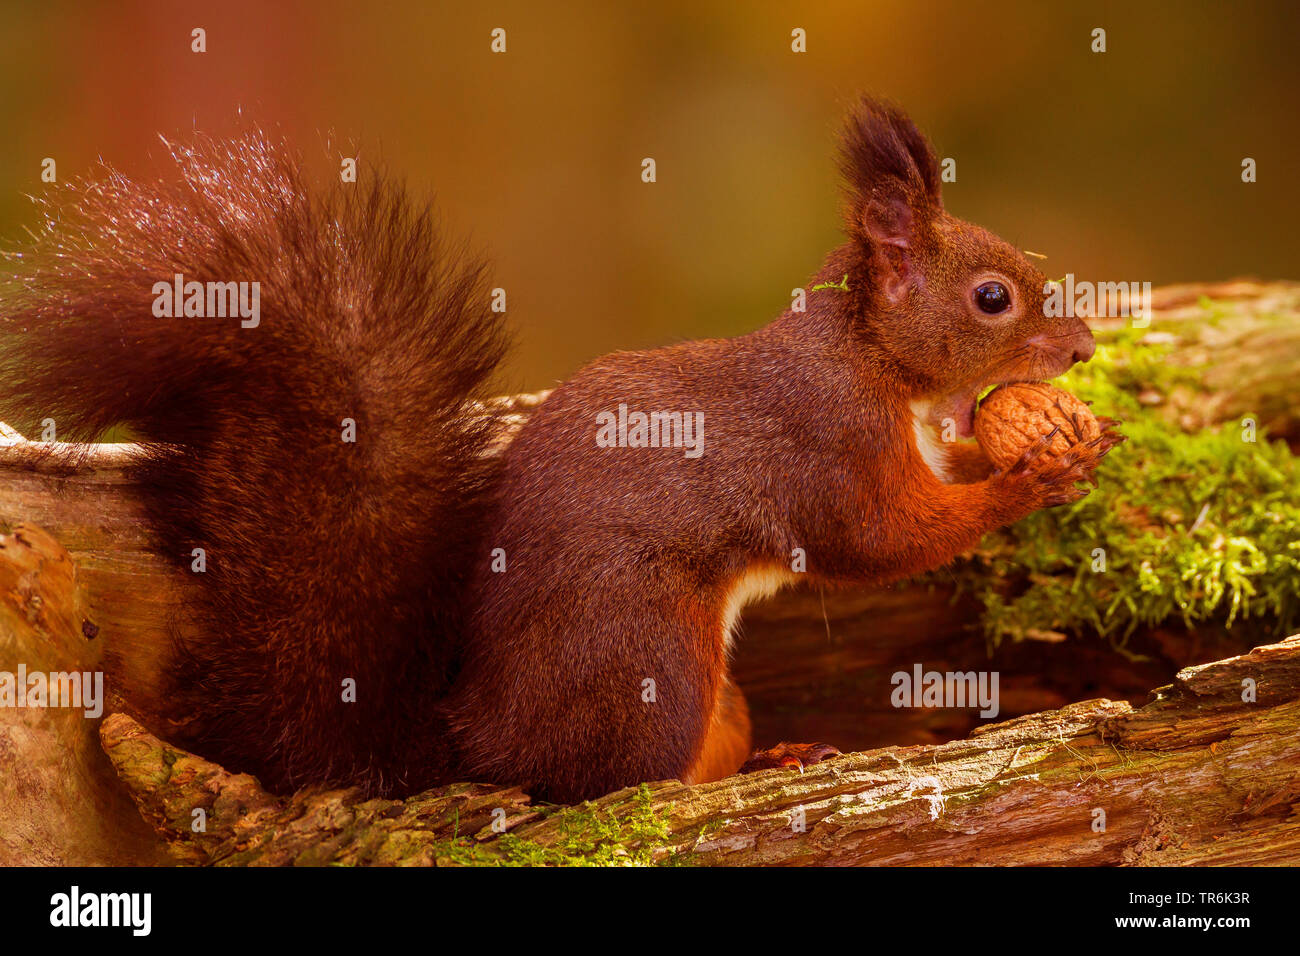 European red squirrel, Eurasian red squirrel (Sciurus vulgaris), with walnut in the mouth, Germany Stock Photo